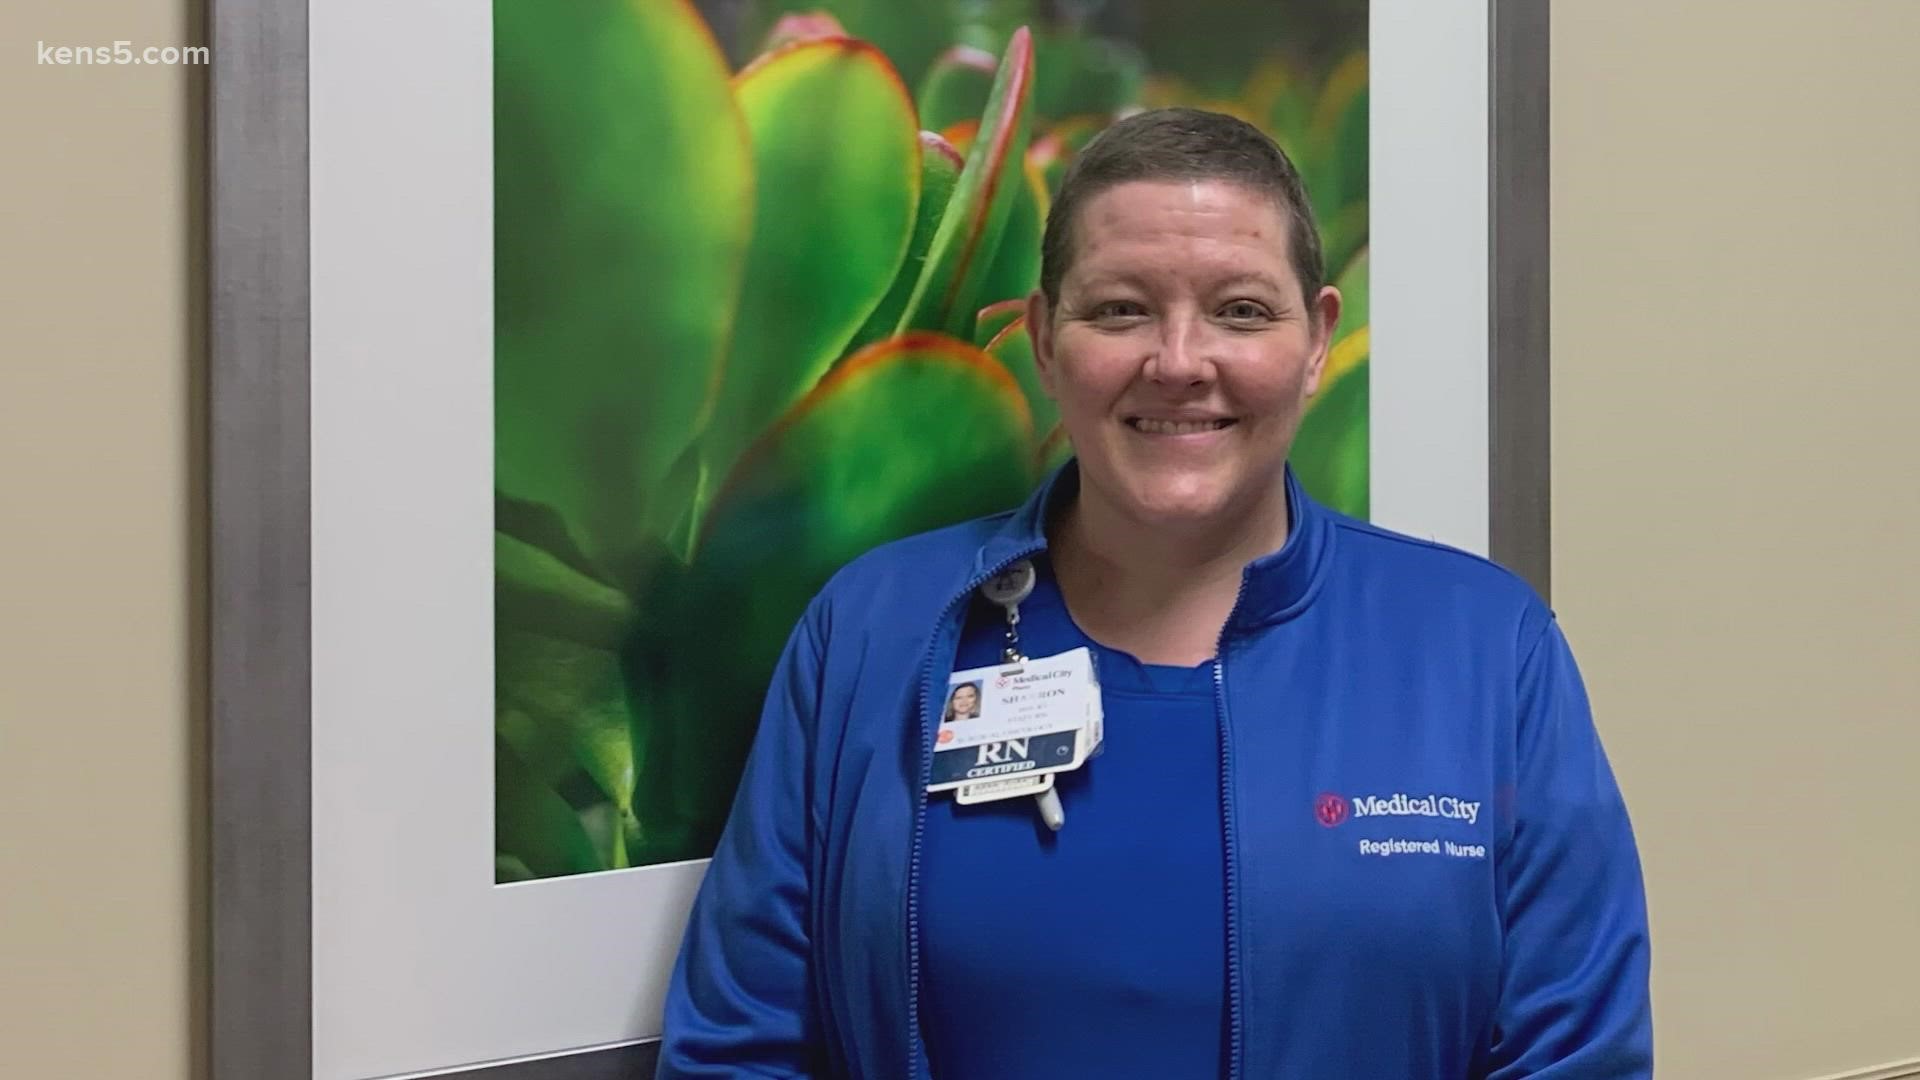 Sharron Kerber continued treating cancer patients throughout her chemotherapy.